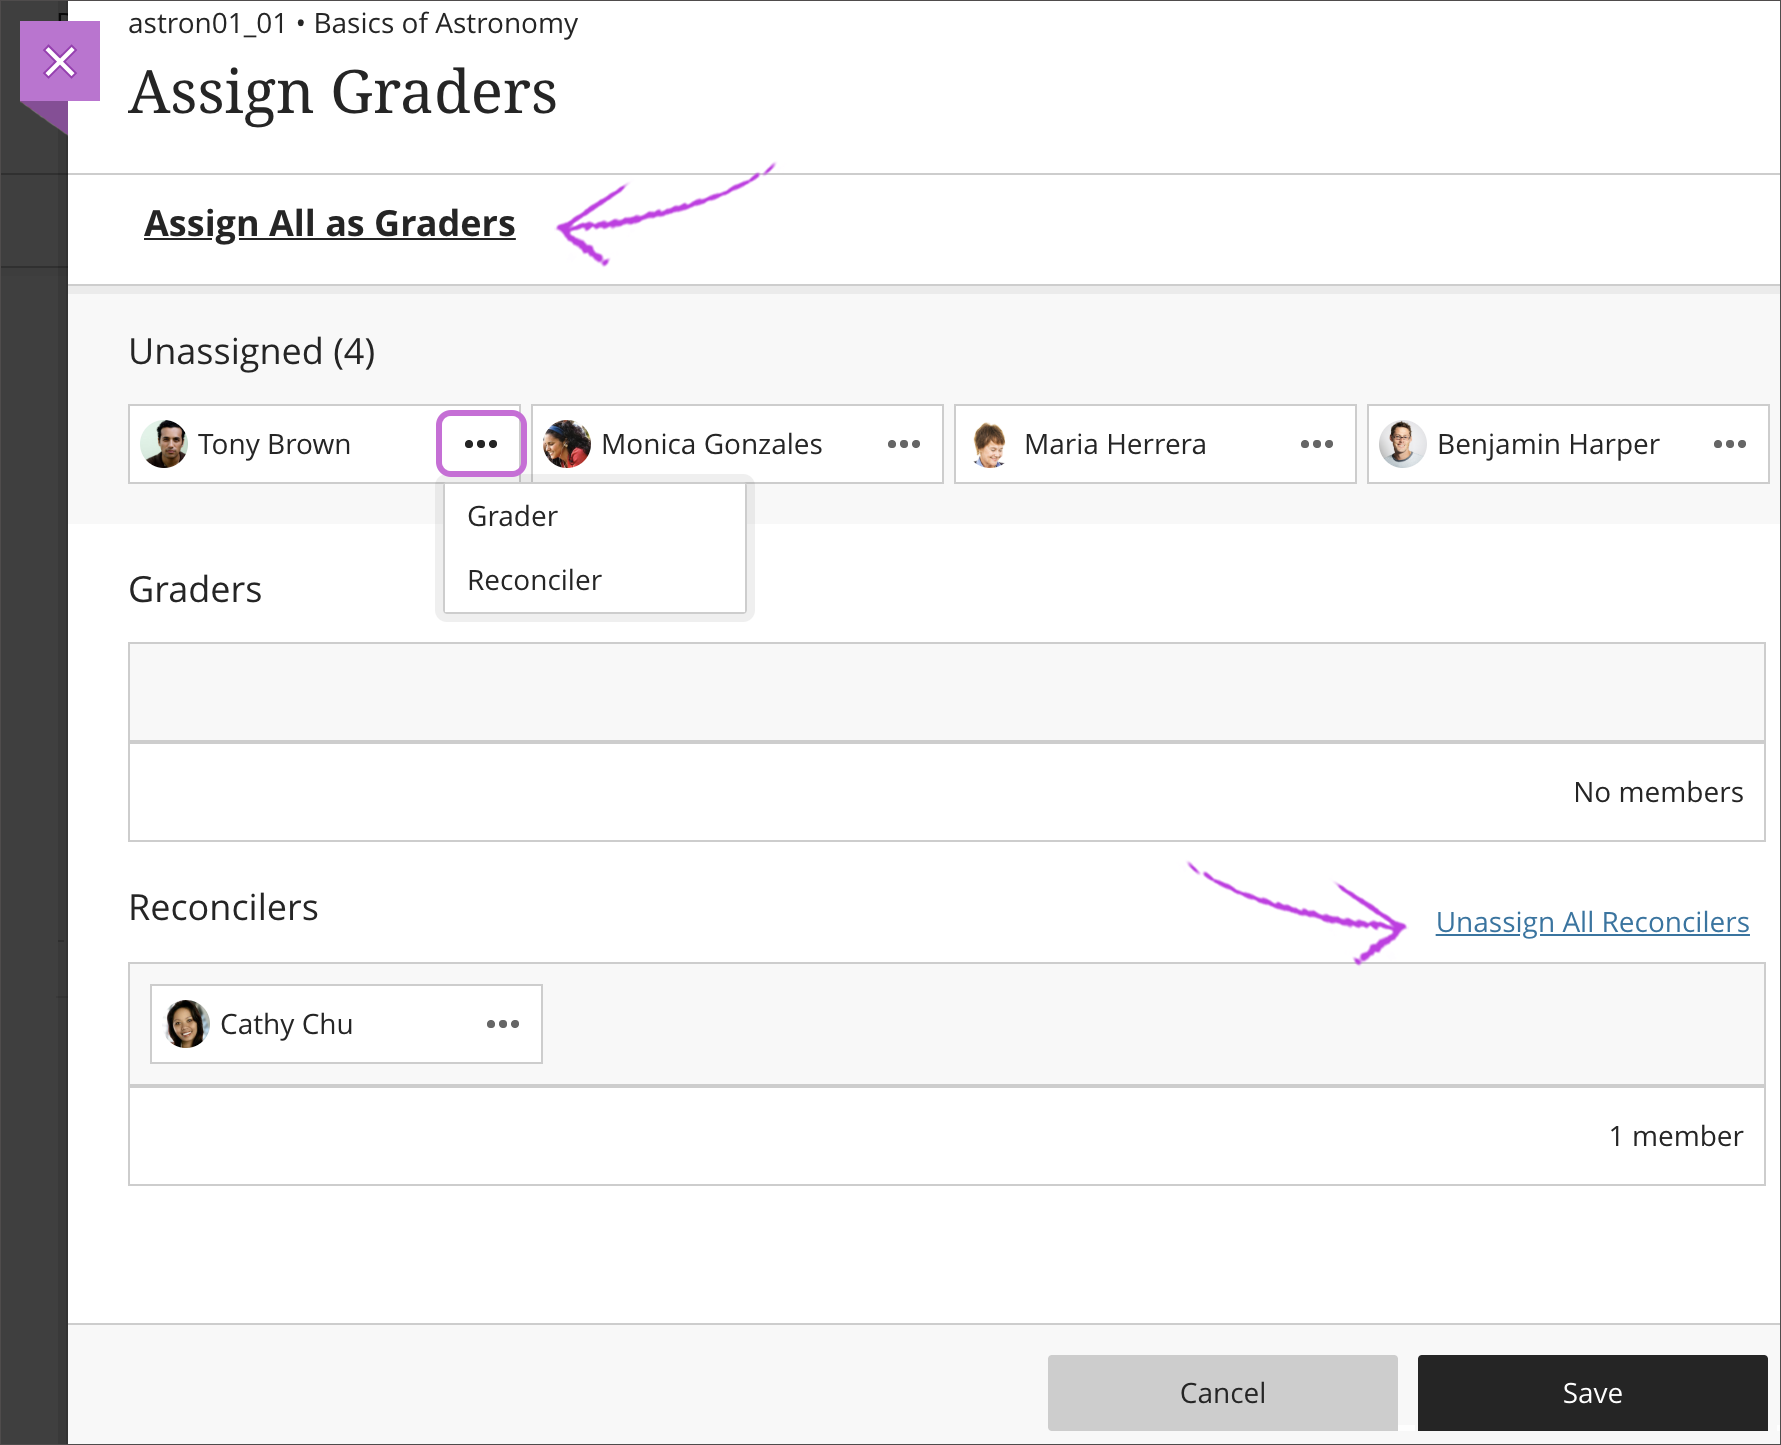 The Assign Graders page is open with 1) the "Assign All as Graders" option highlighted, 2) the three dots menu next to the usernames selected with the "Grader" and "Reconciler" options displayed, and 3) the "Unassigned All Reconcilers" option highlighted.